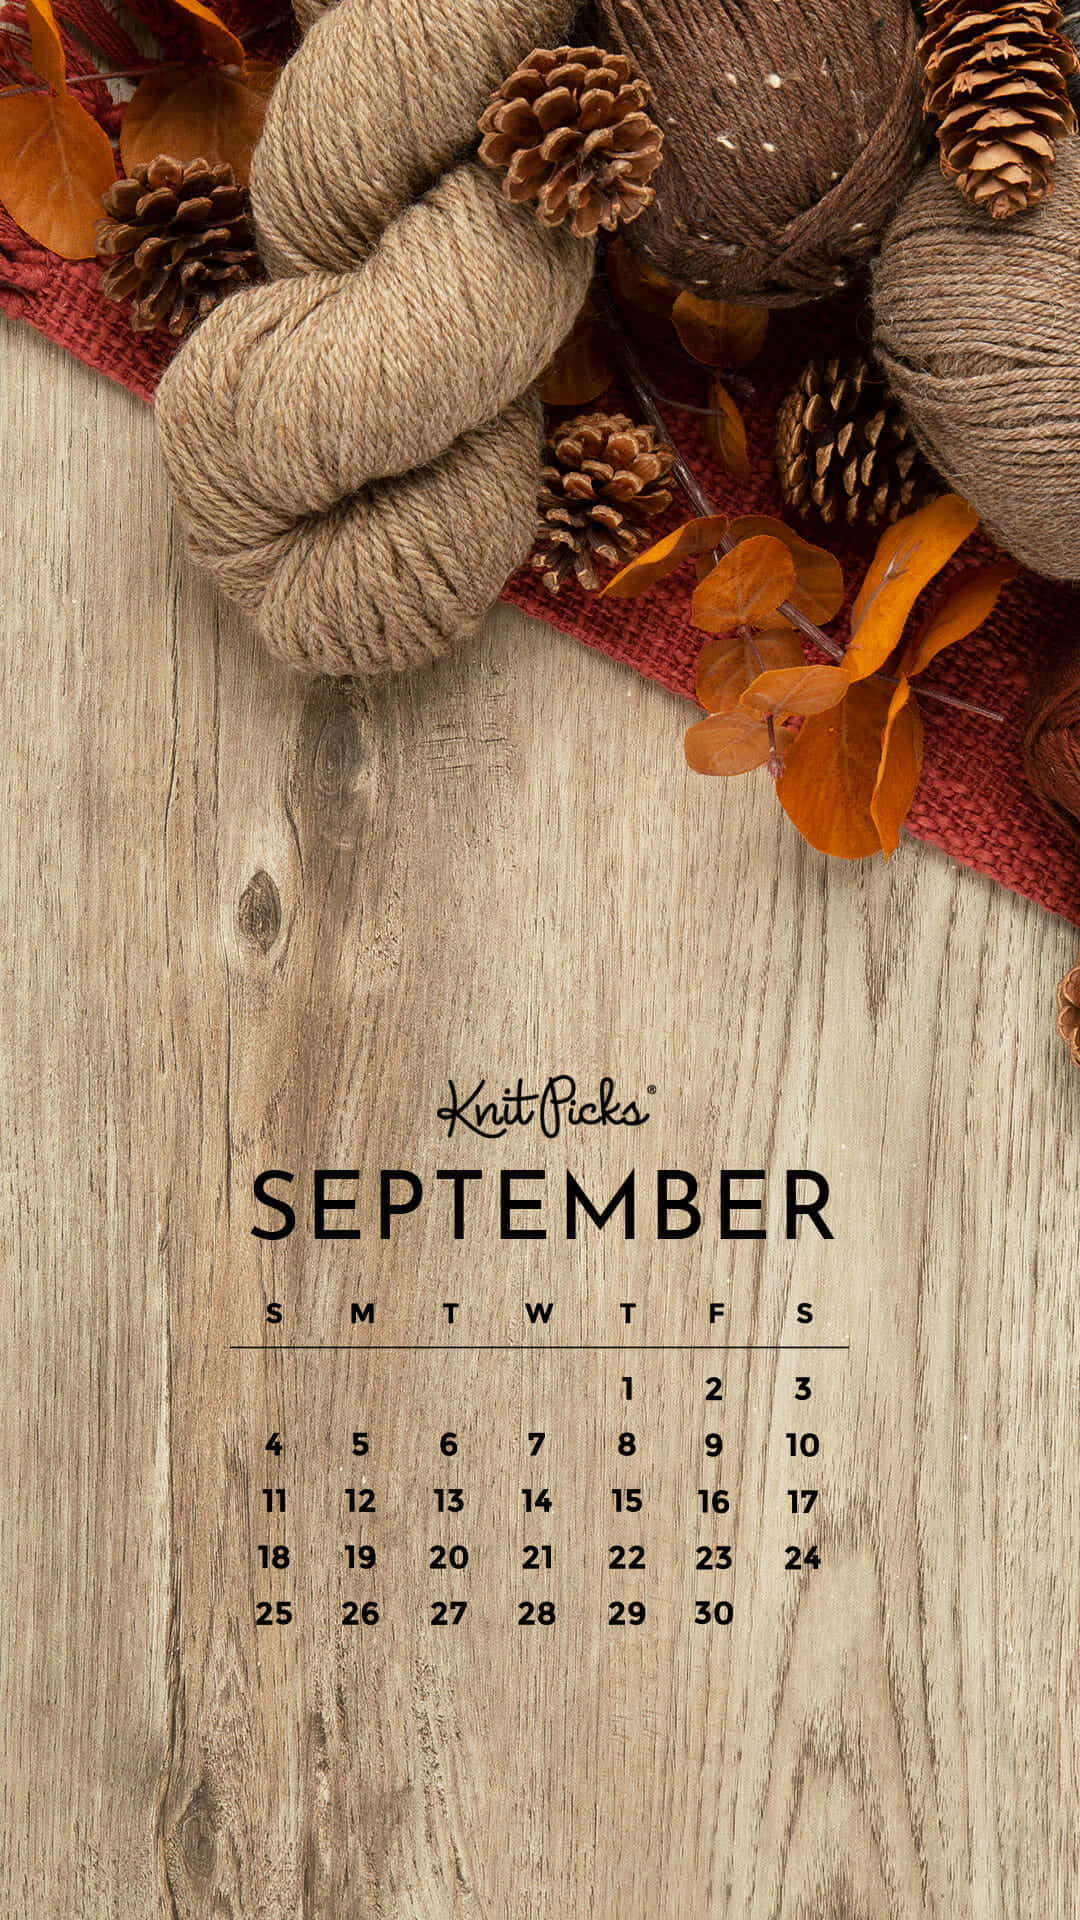 "Experience the Beauty of September"